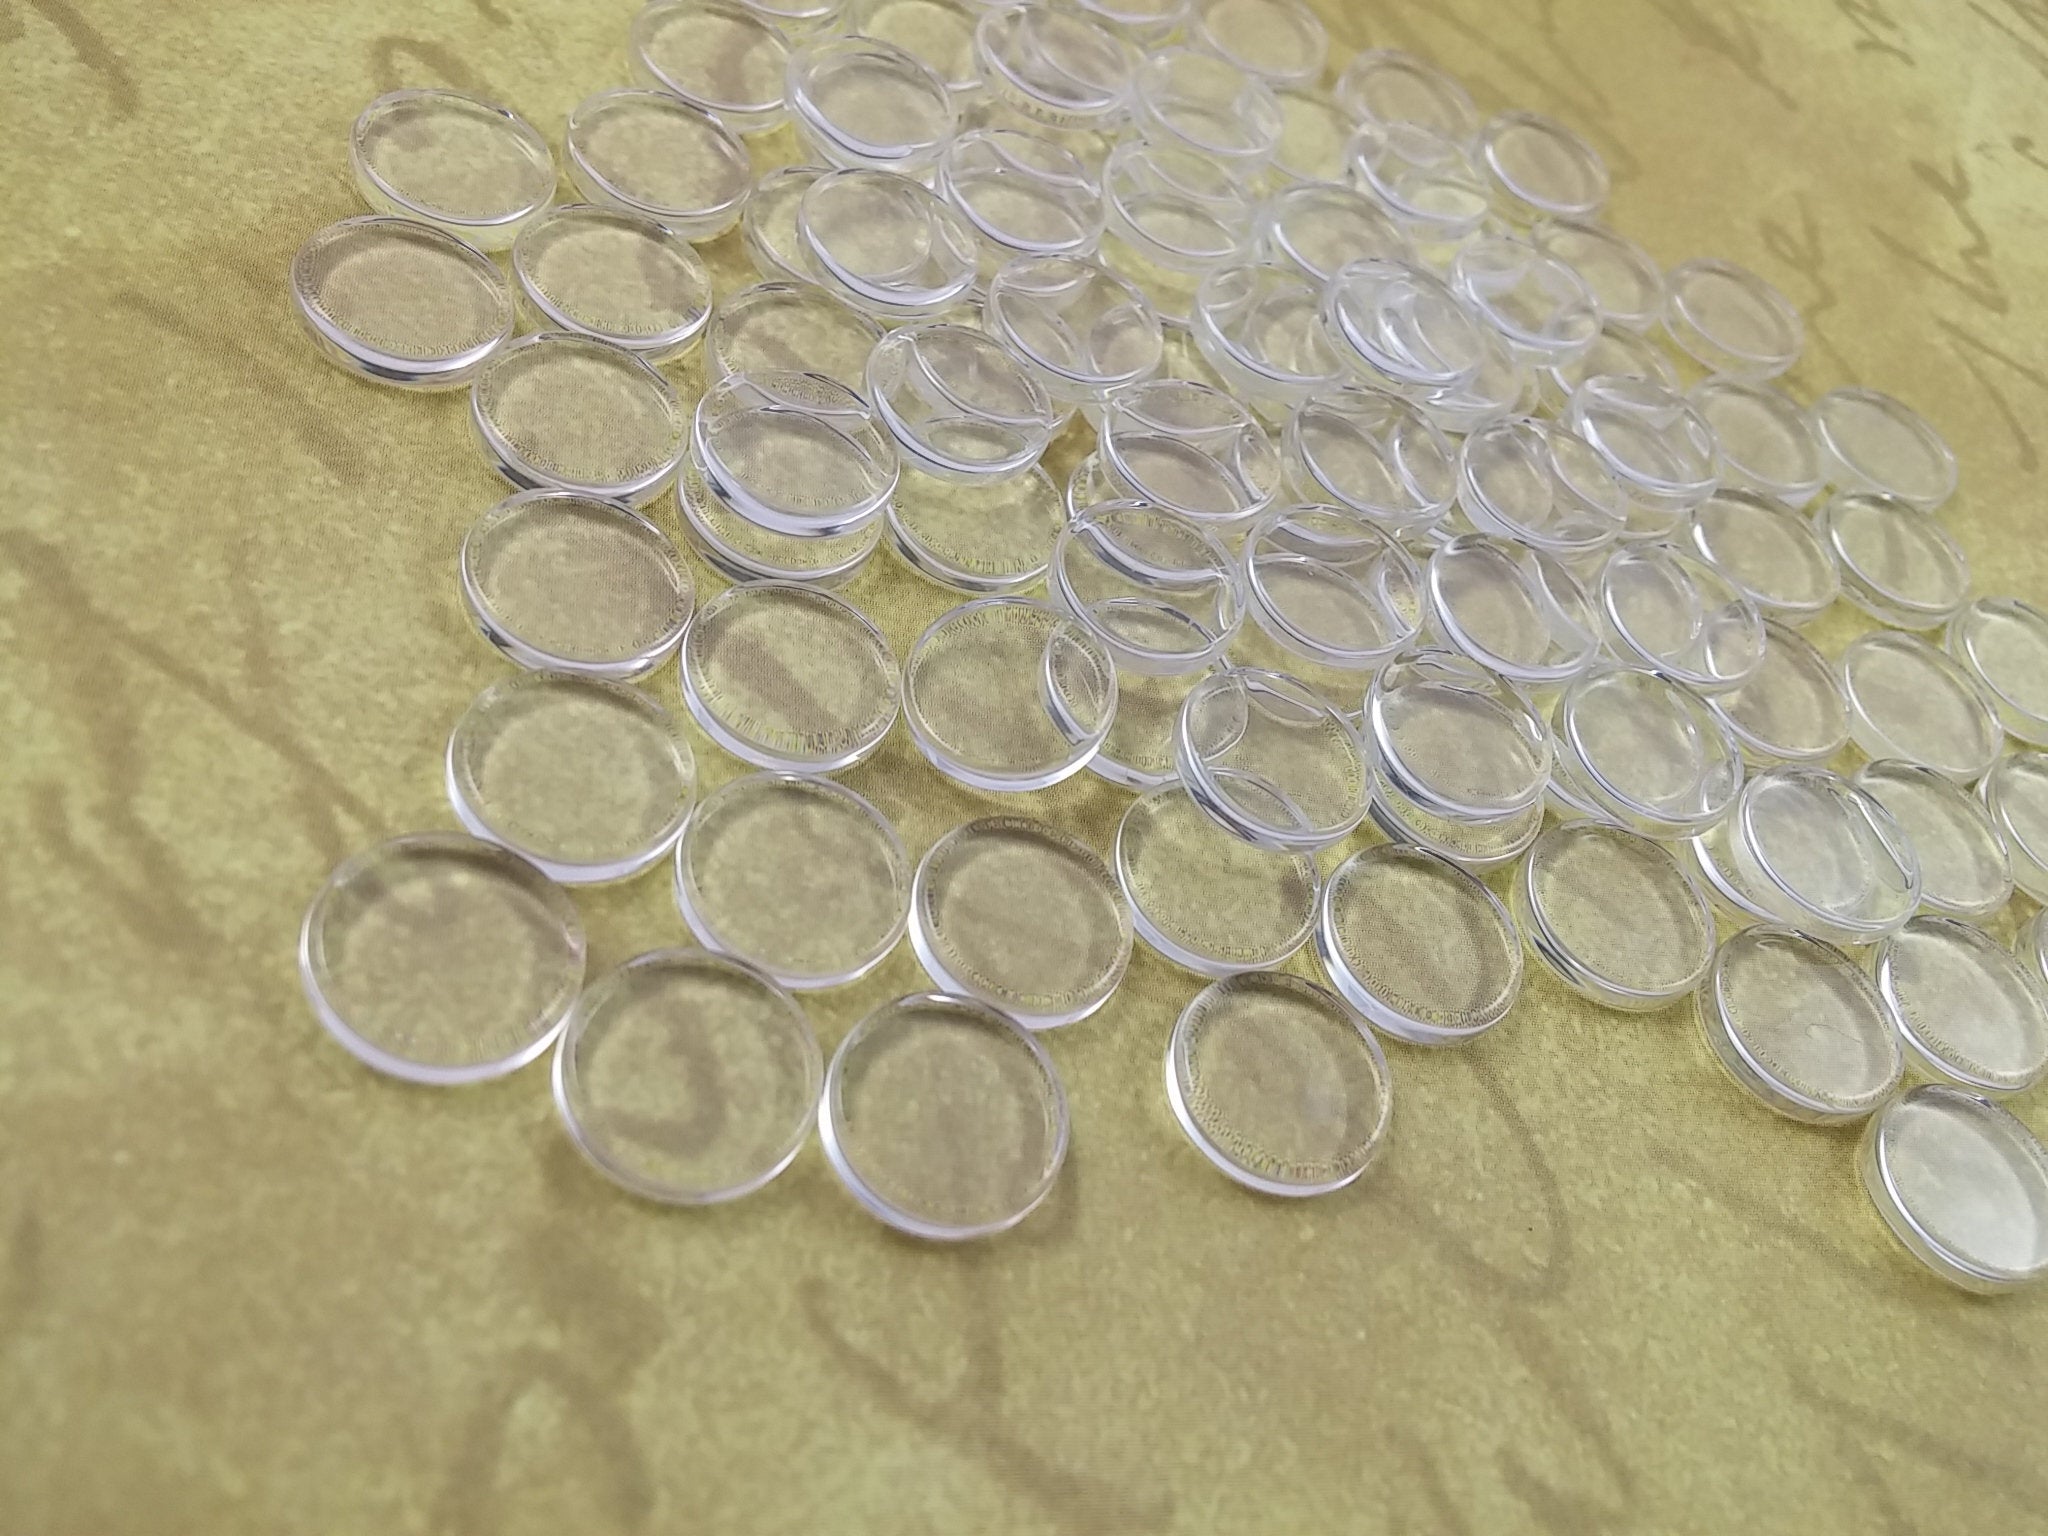 Round Clear Glass Cabochons, Flat back dome inserts for jewelry making